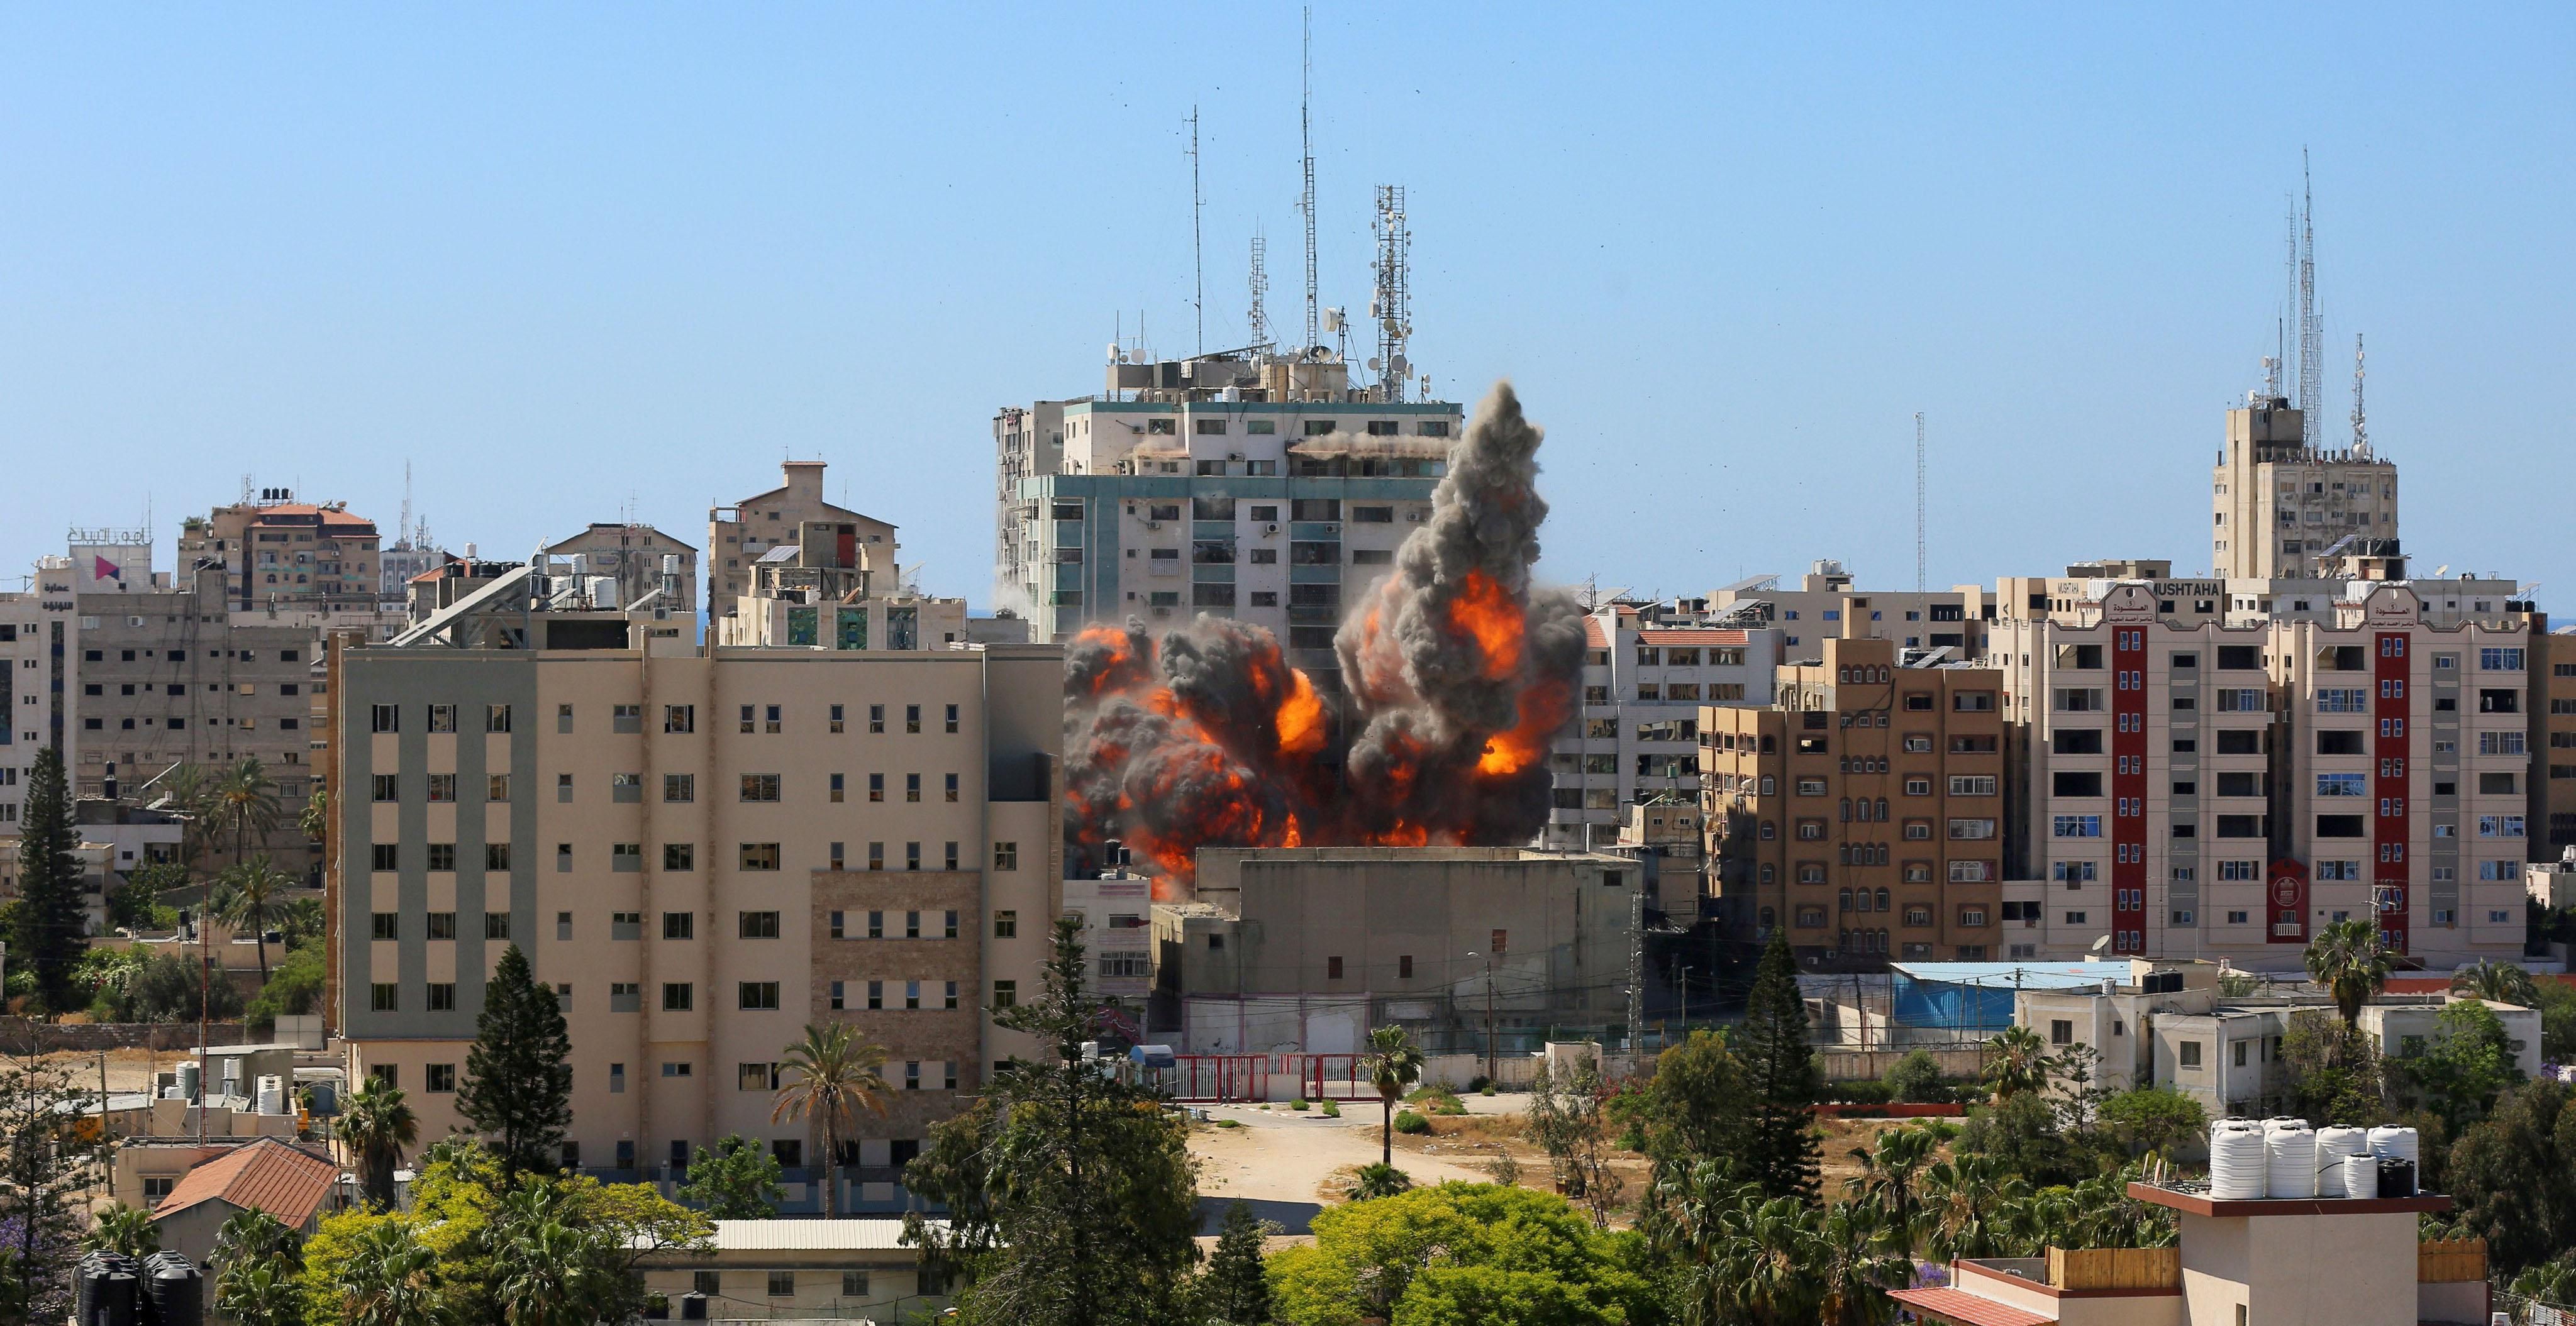 A view of a 11-story building housing AP office and other media in Gaza City is seen moments after Israeli warplanes demolished it, Saturday, May 15, 2021. There was no immediate explanation for why the building was targeted. The building housed The Associated Press, Al-Jazeera and a number of offices and apartments.